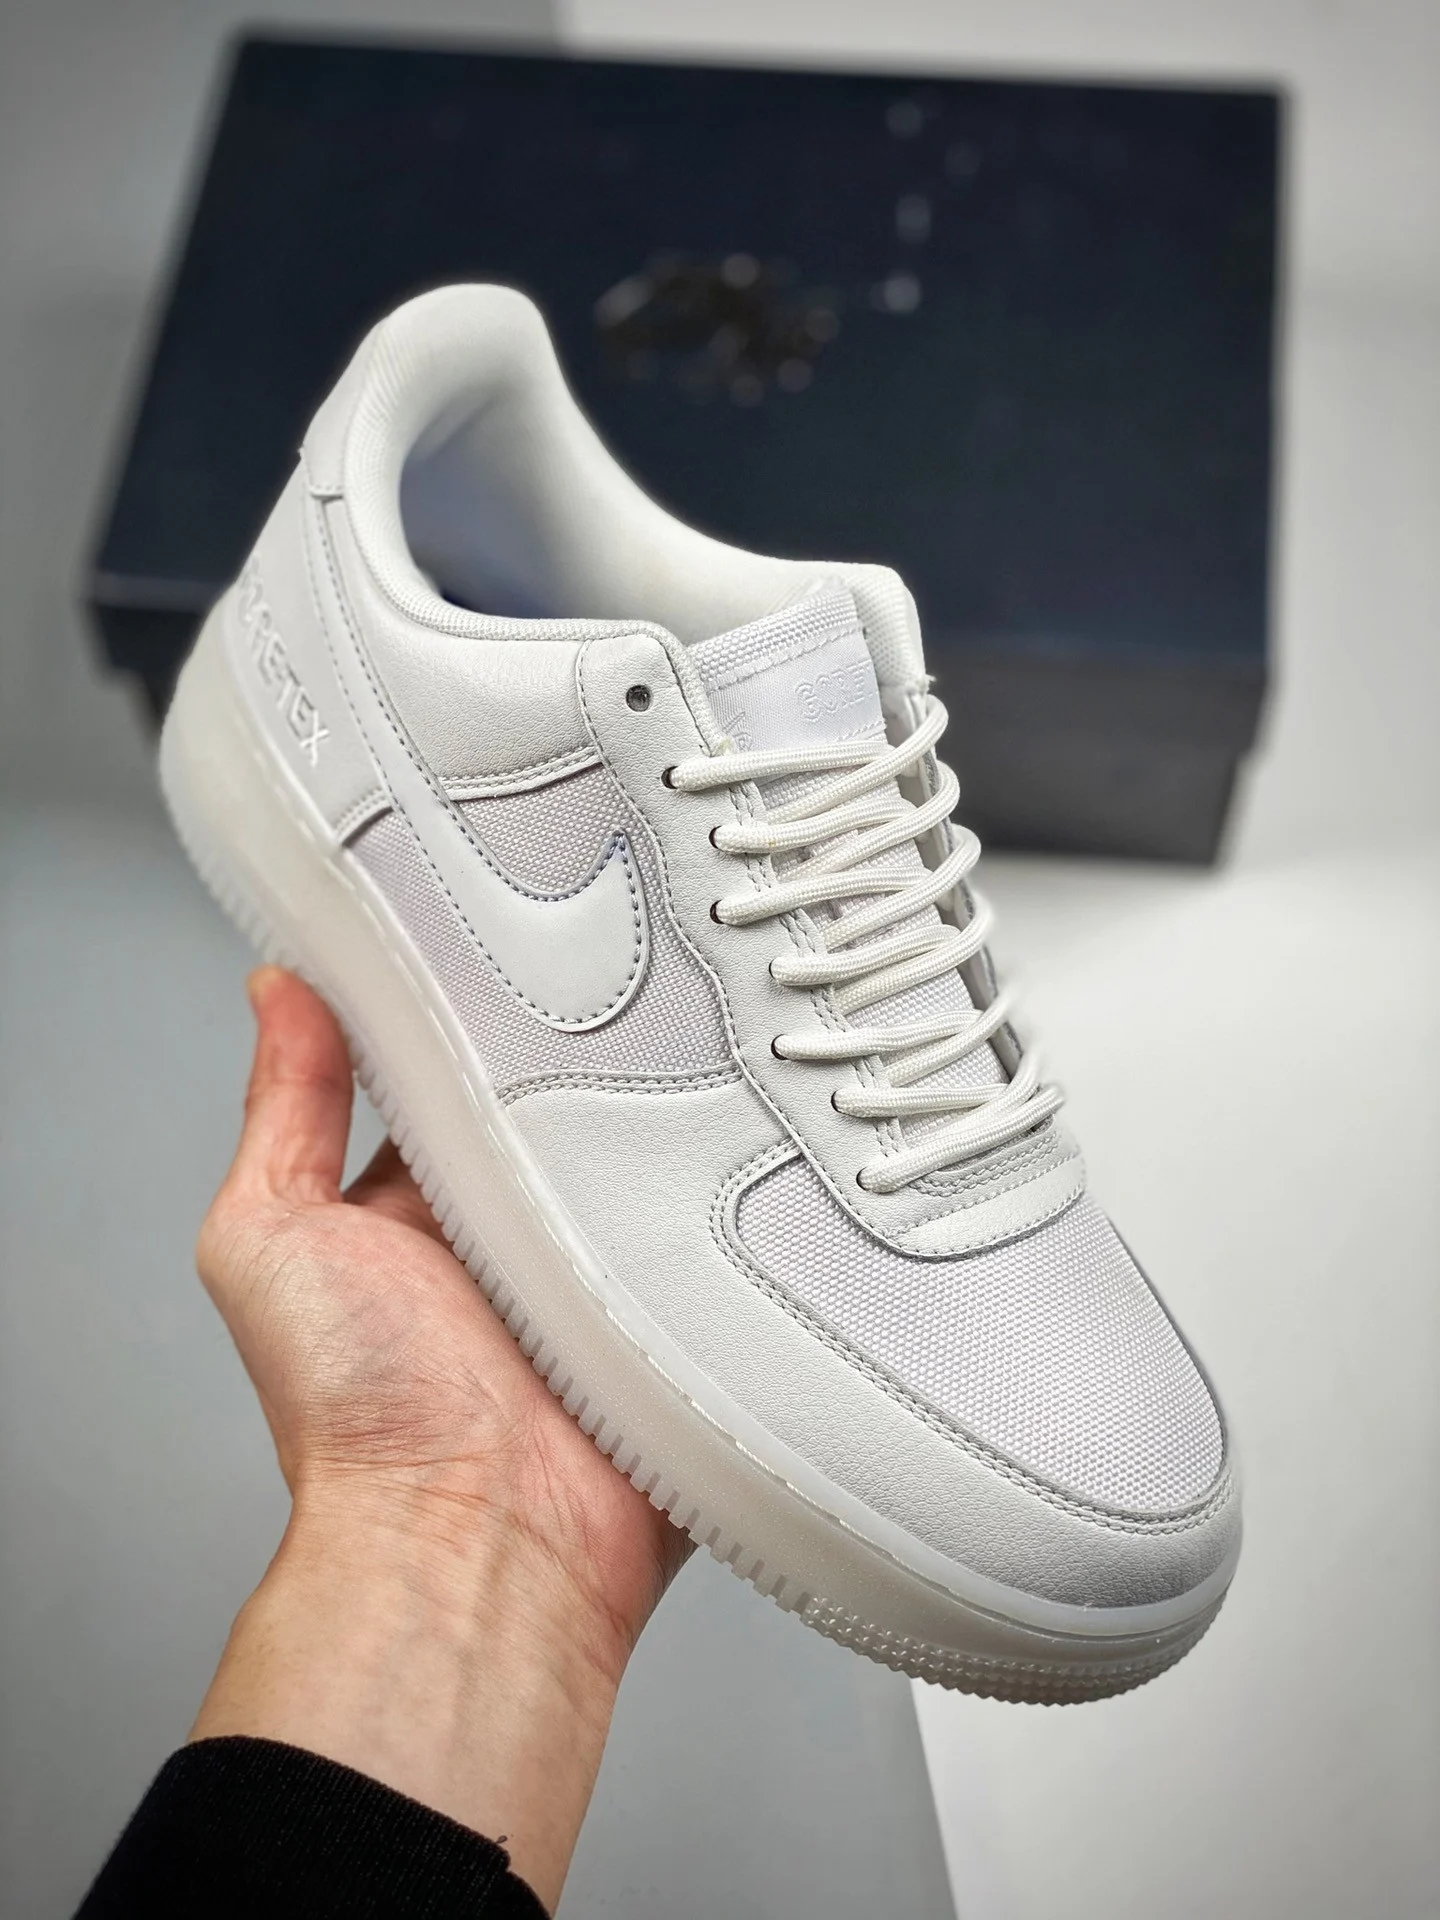 Nike Air Force 1 Low GORE-TEX White Hyper Royal For Sale